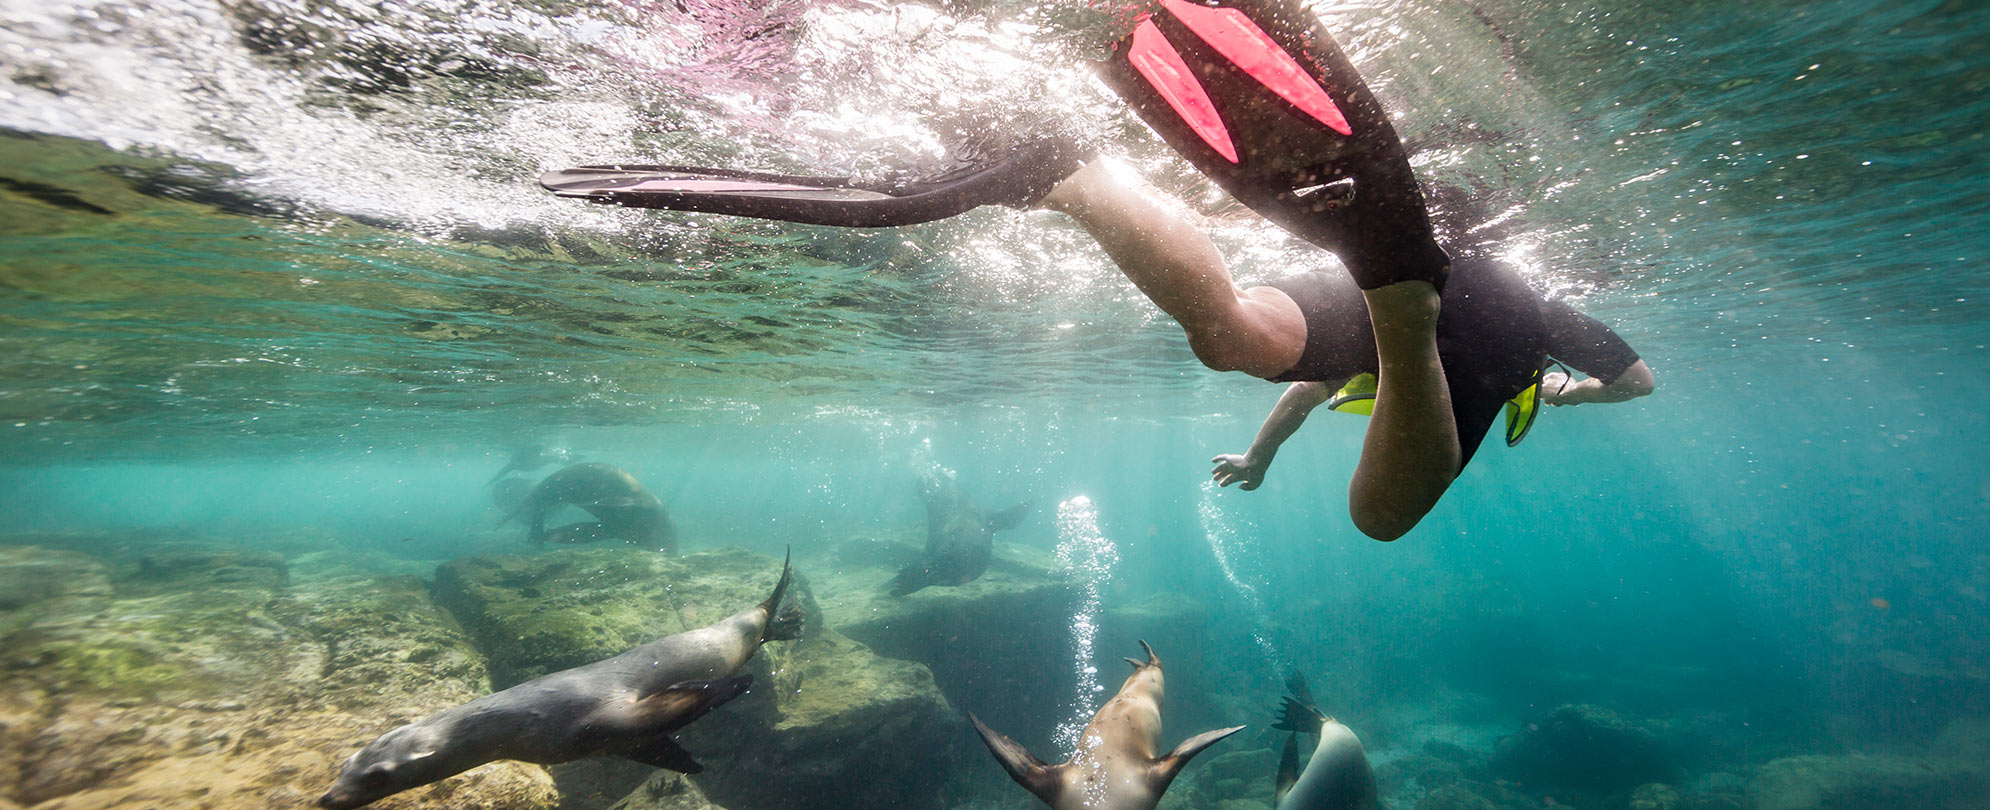 View from underwater as a snorkeler with swim fins on looks over a group of sea lions swimming through rocks in the ocean.